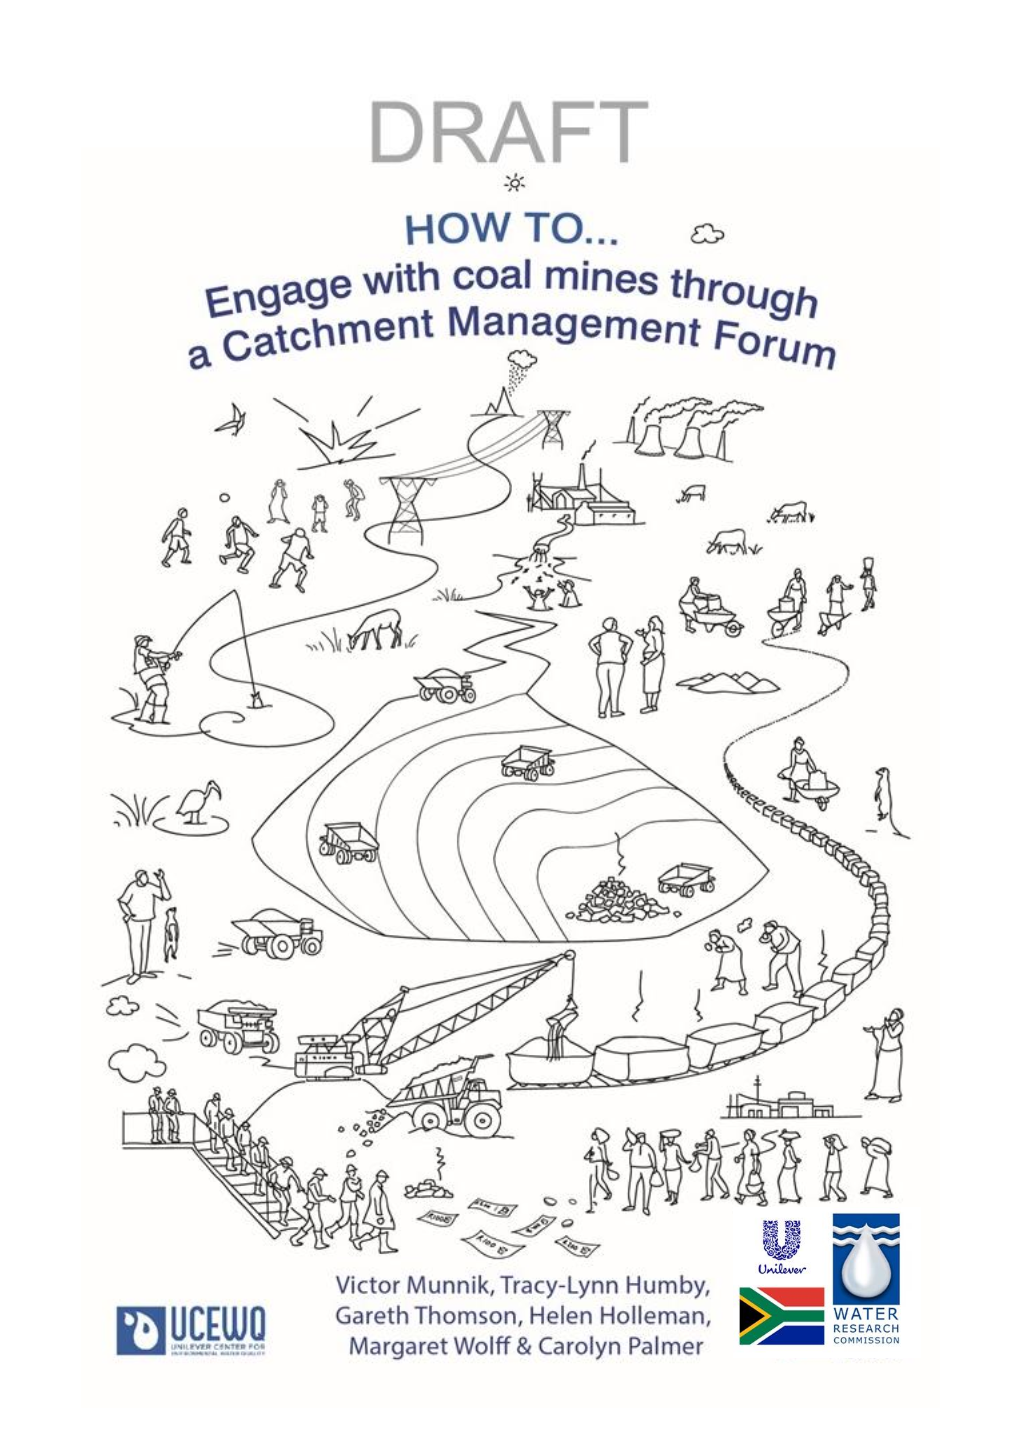 How to Engage with Coal Mines Through a Catchment Management Forum